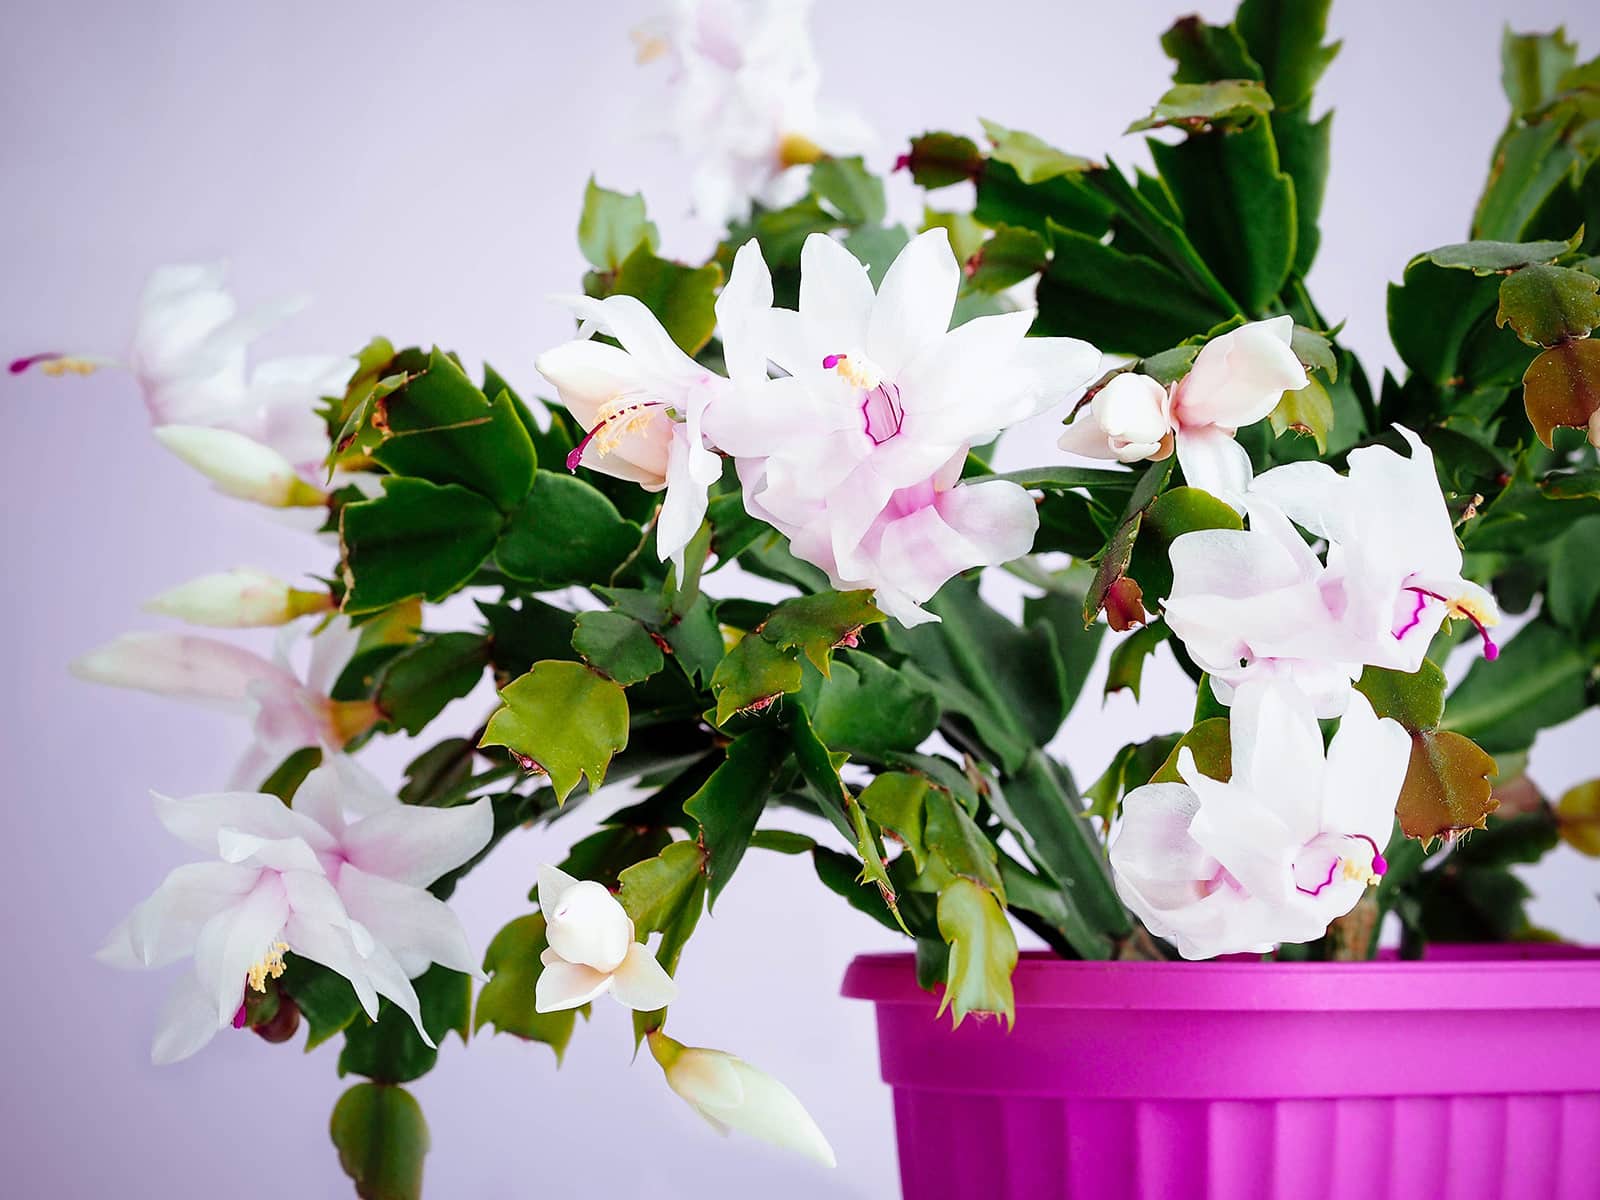 White Christmas cactus flowers in bloom in a magenta pot